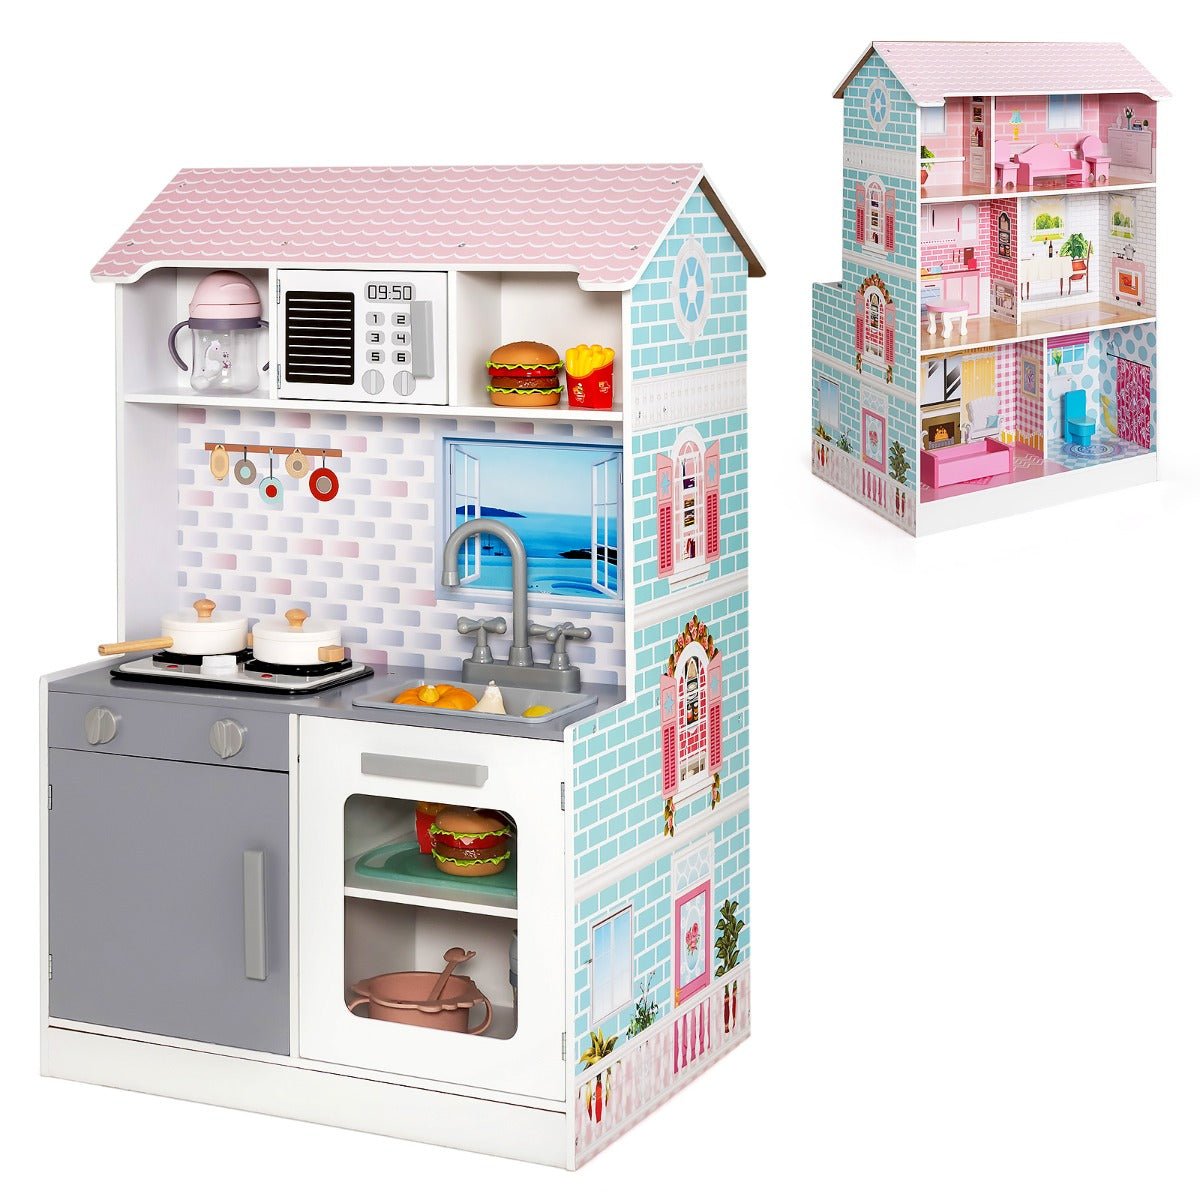 Doll House and Play Kitchen Combo: 2 in 1 Wooden Set with Accessories